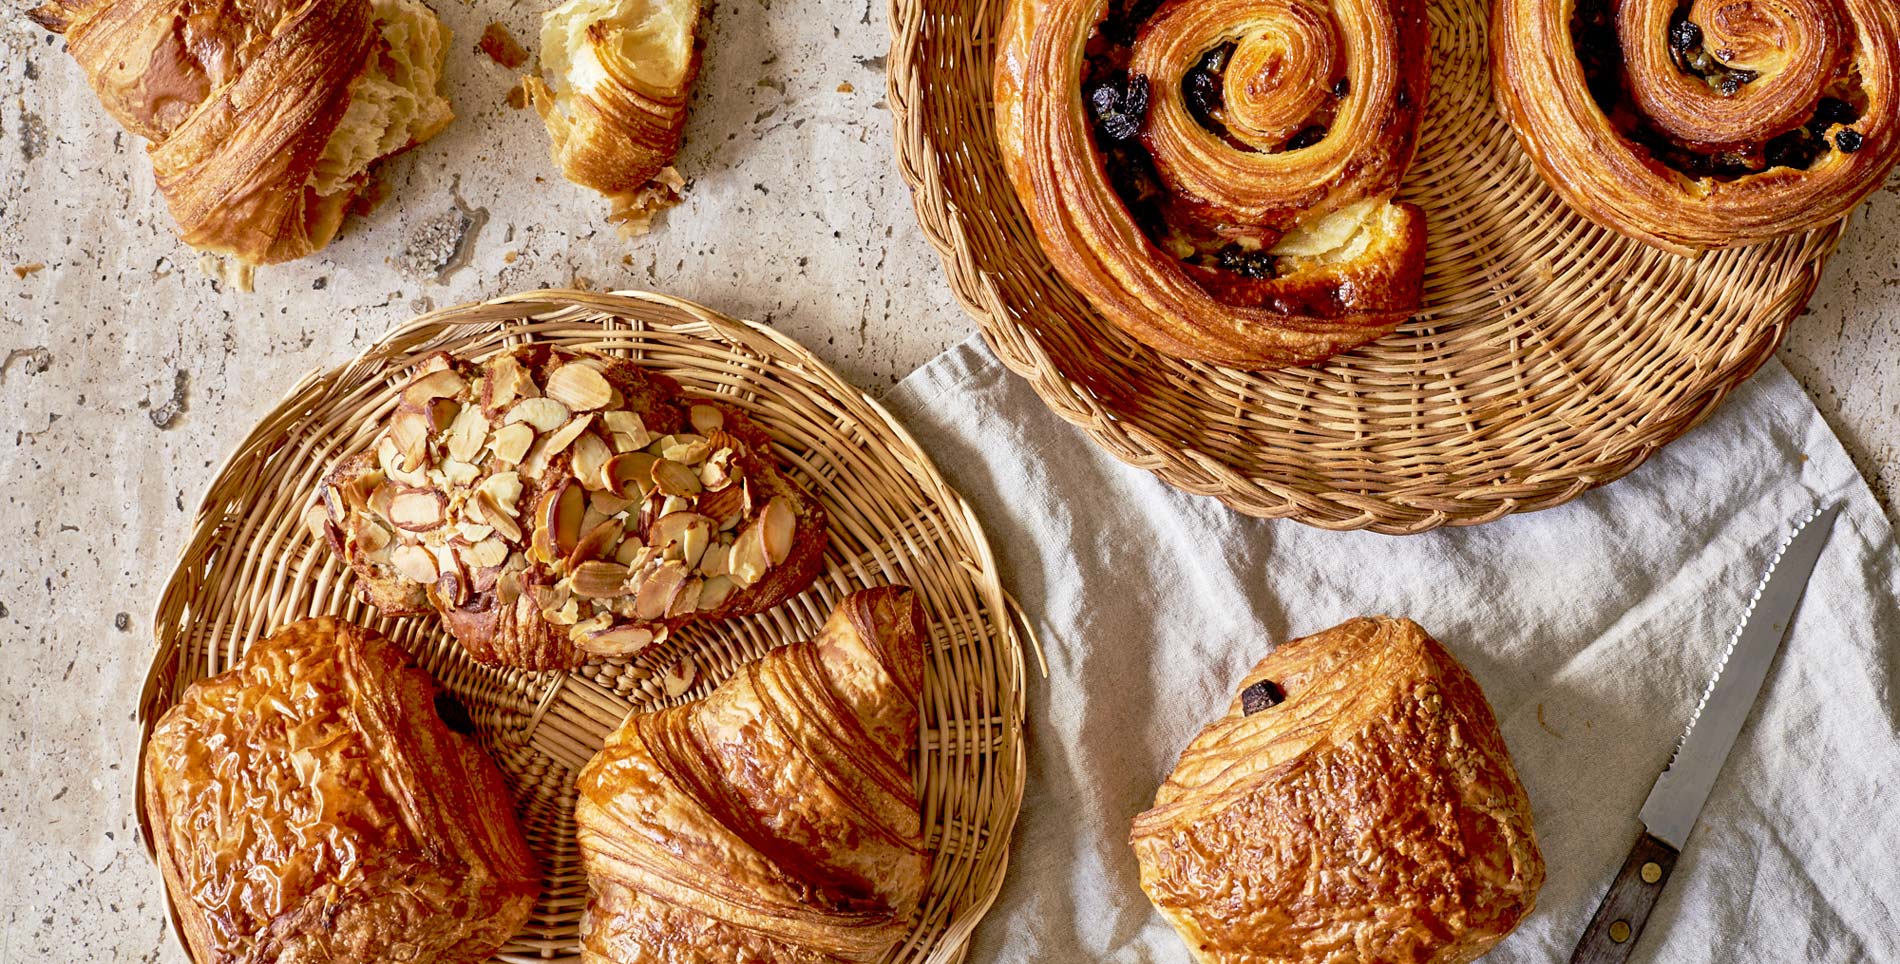 The Revolution and Evolution of the French Breakfast